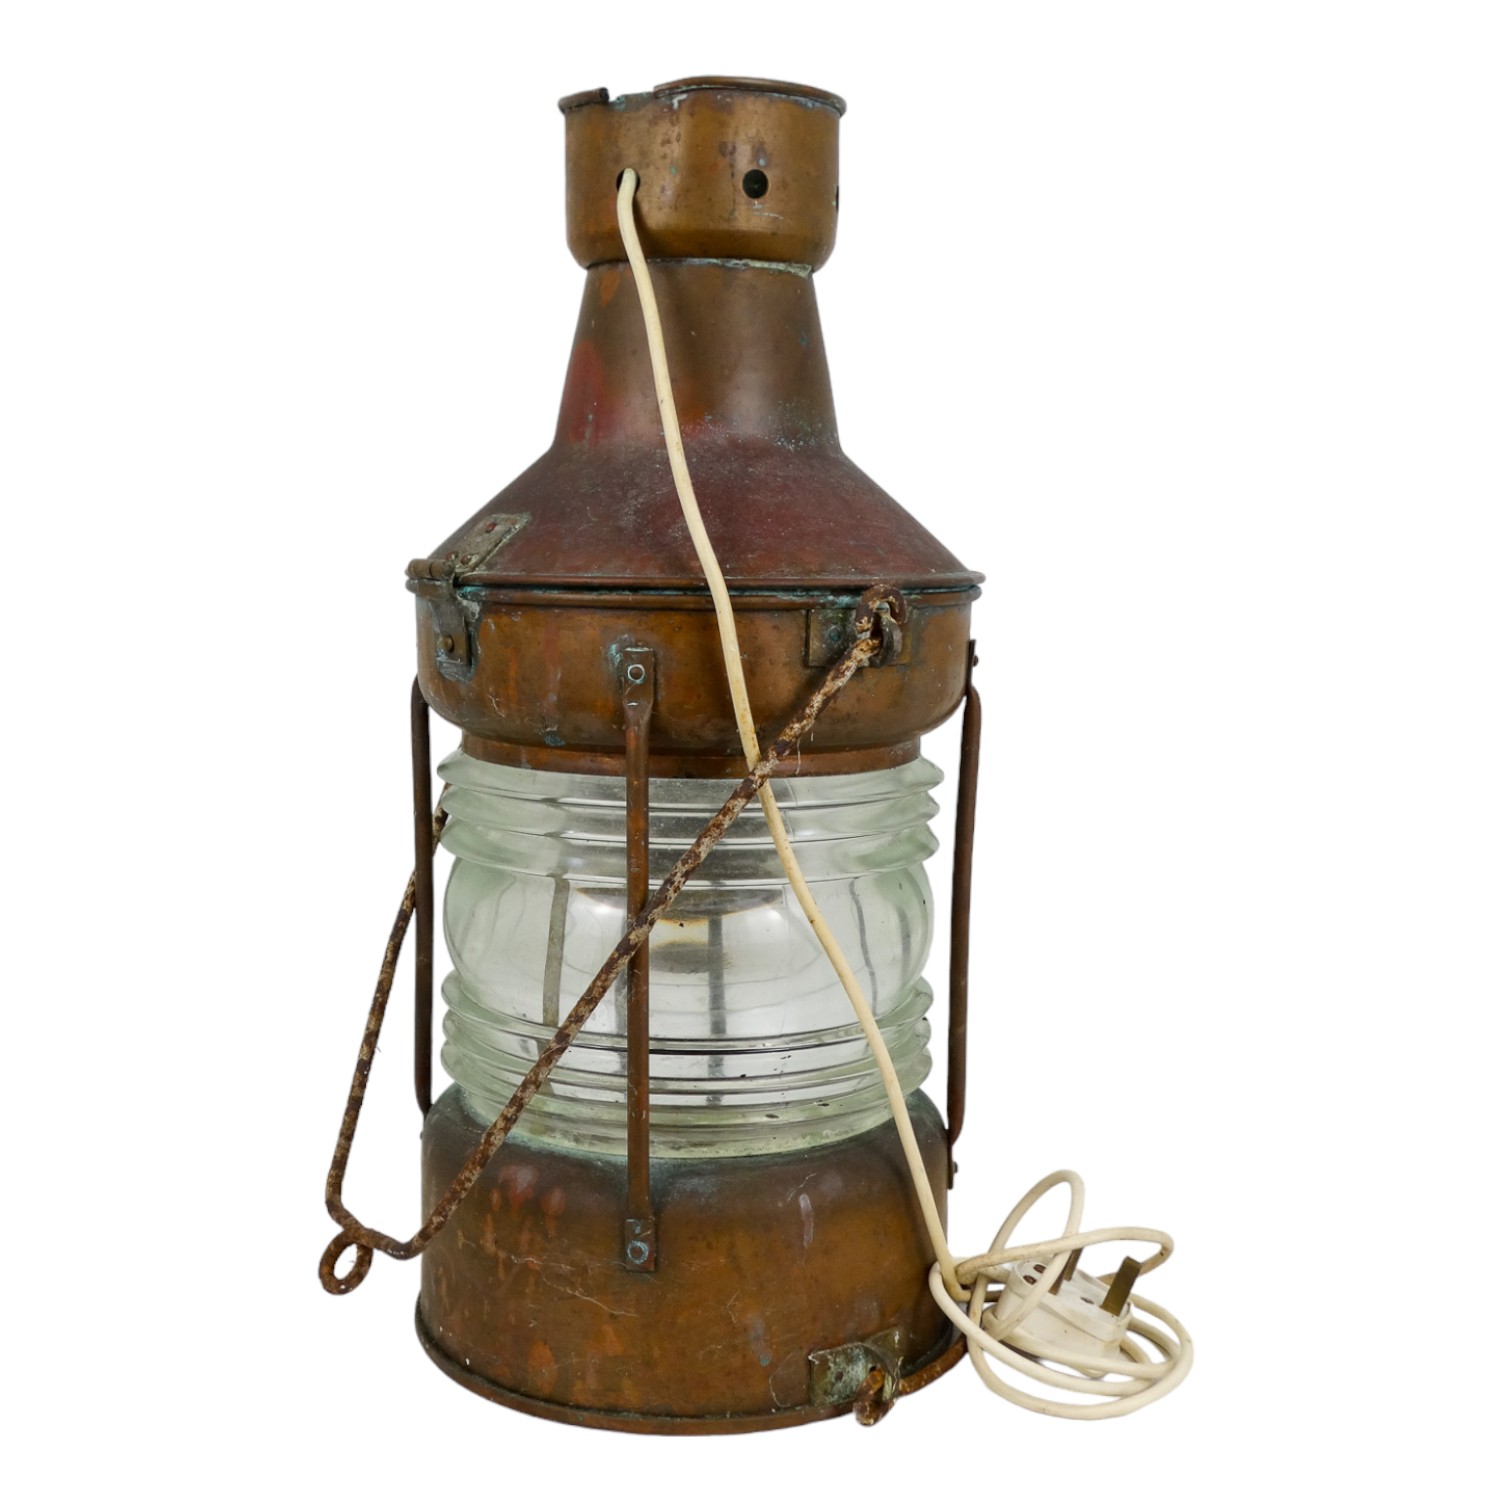 An early 20th century masthead light by H. Henriksen - copper with wrought steel handles, - Image 4 of 5